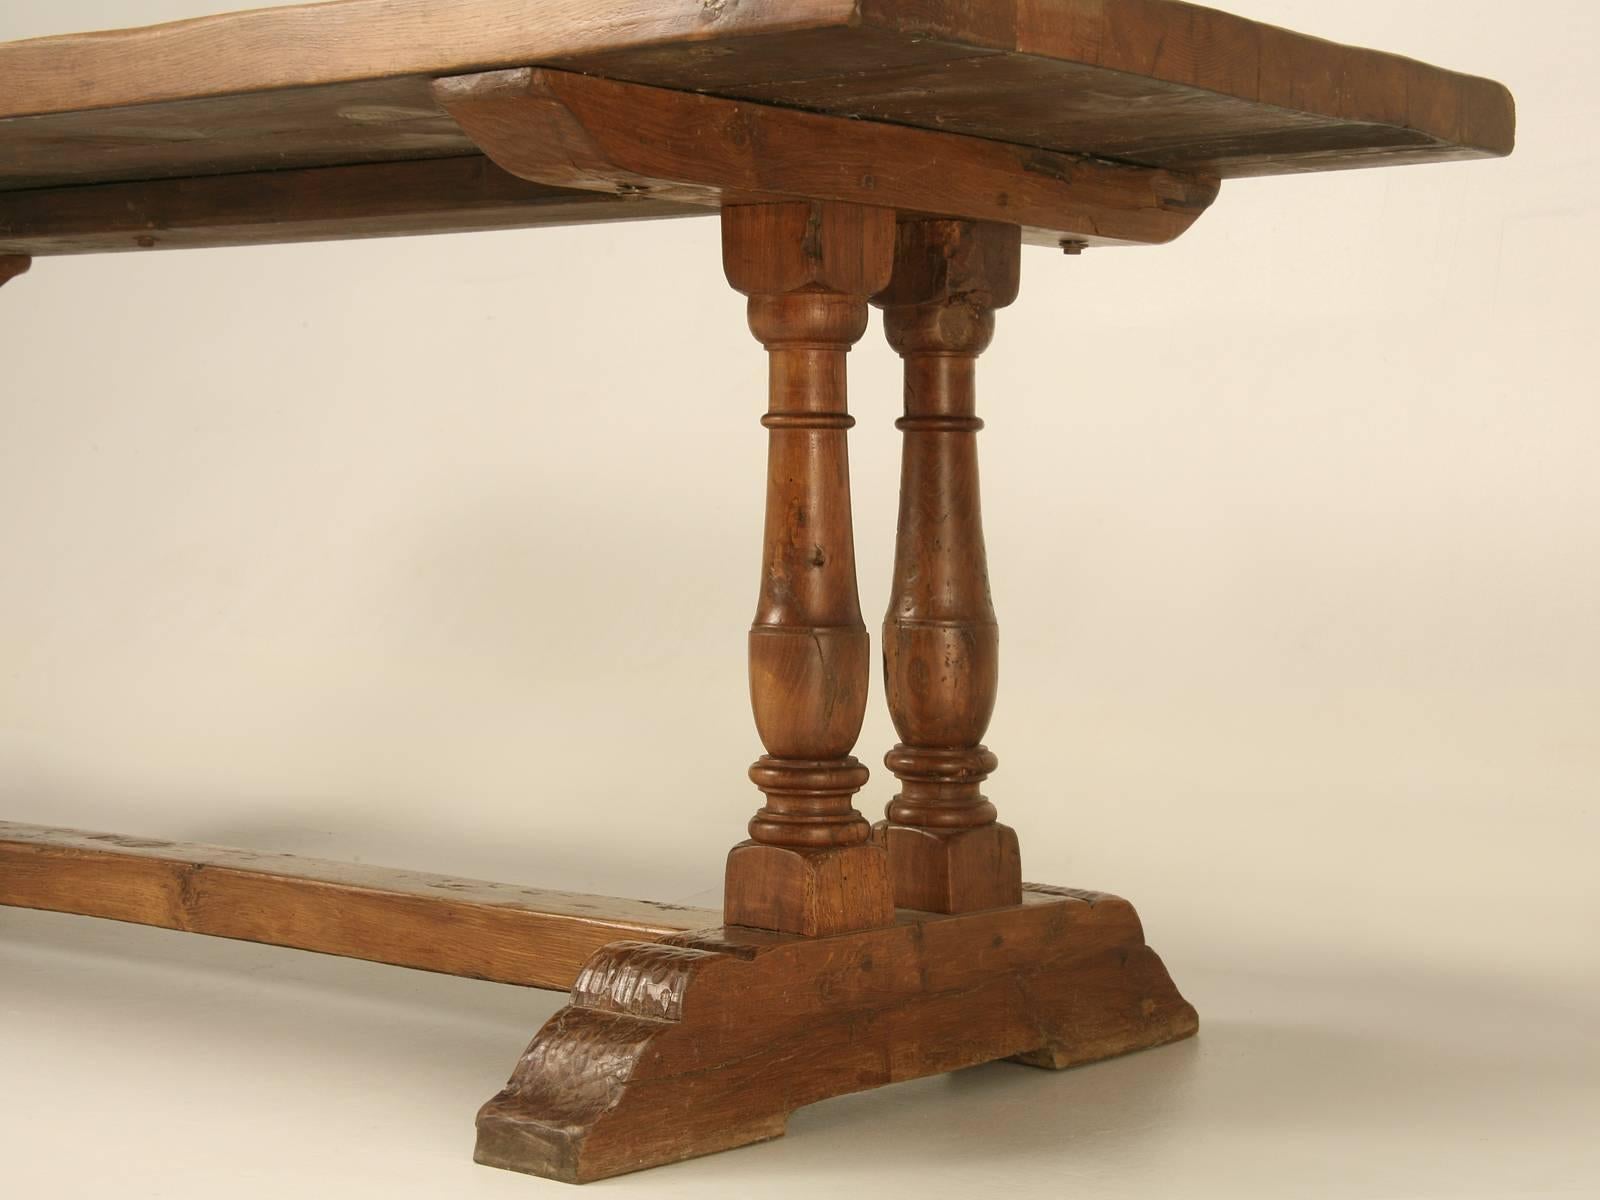 Hand-Crafted Antique French Farm Table Found in a French Monastery Late 1800's